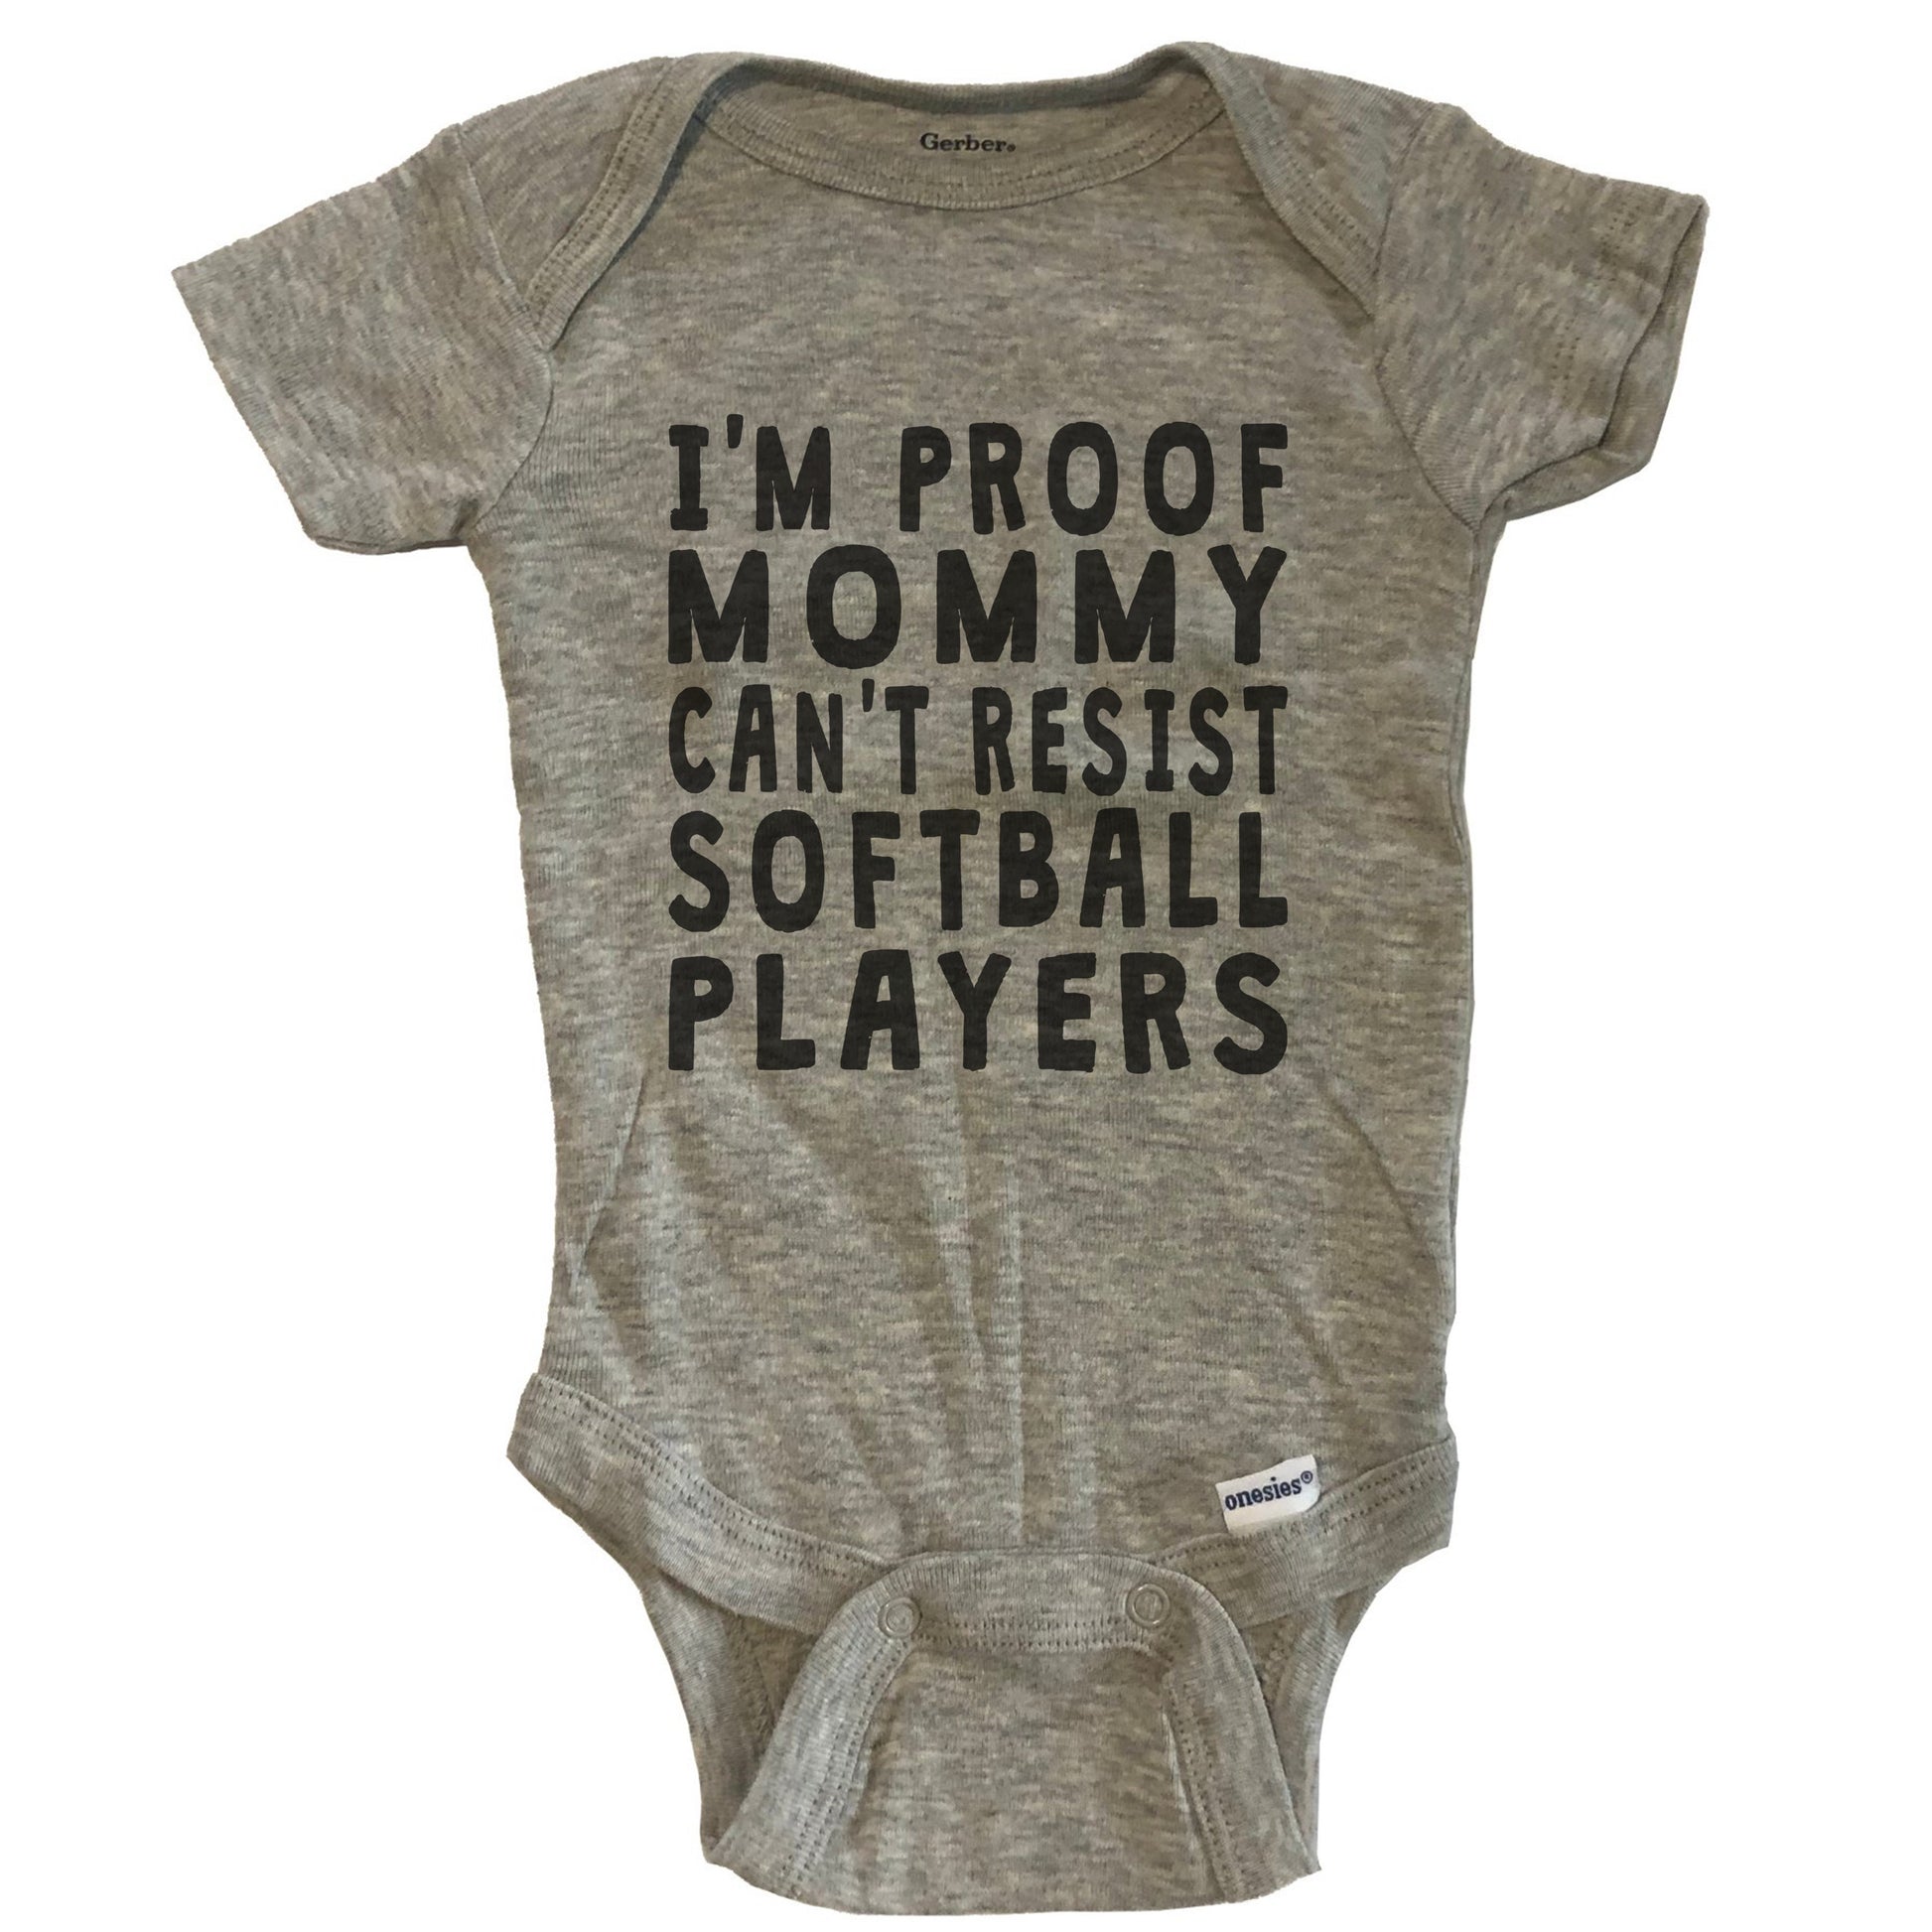 I'm Proof Mommy Can't Resist Softball Players Funny Baby Onesie - Grey